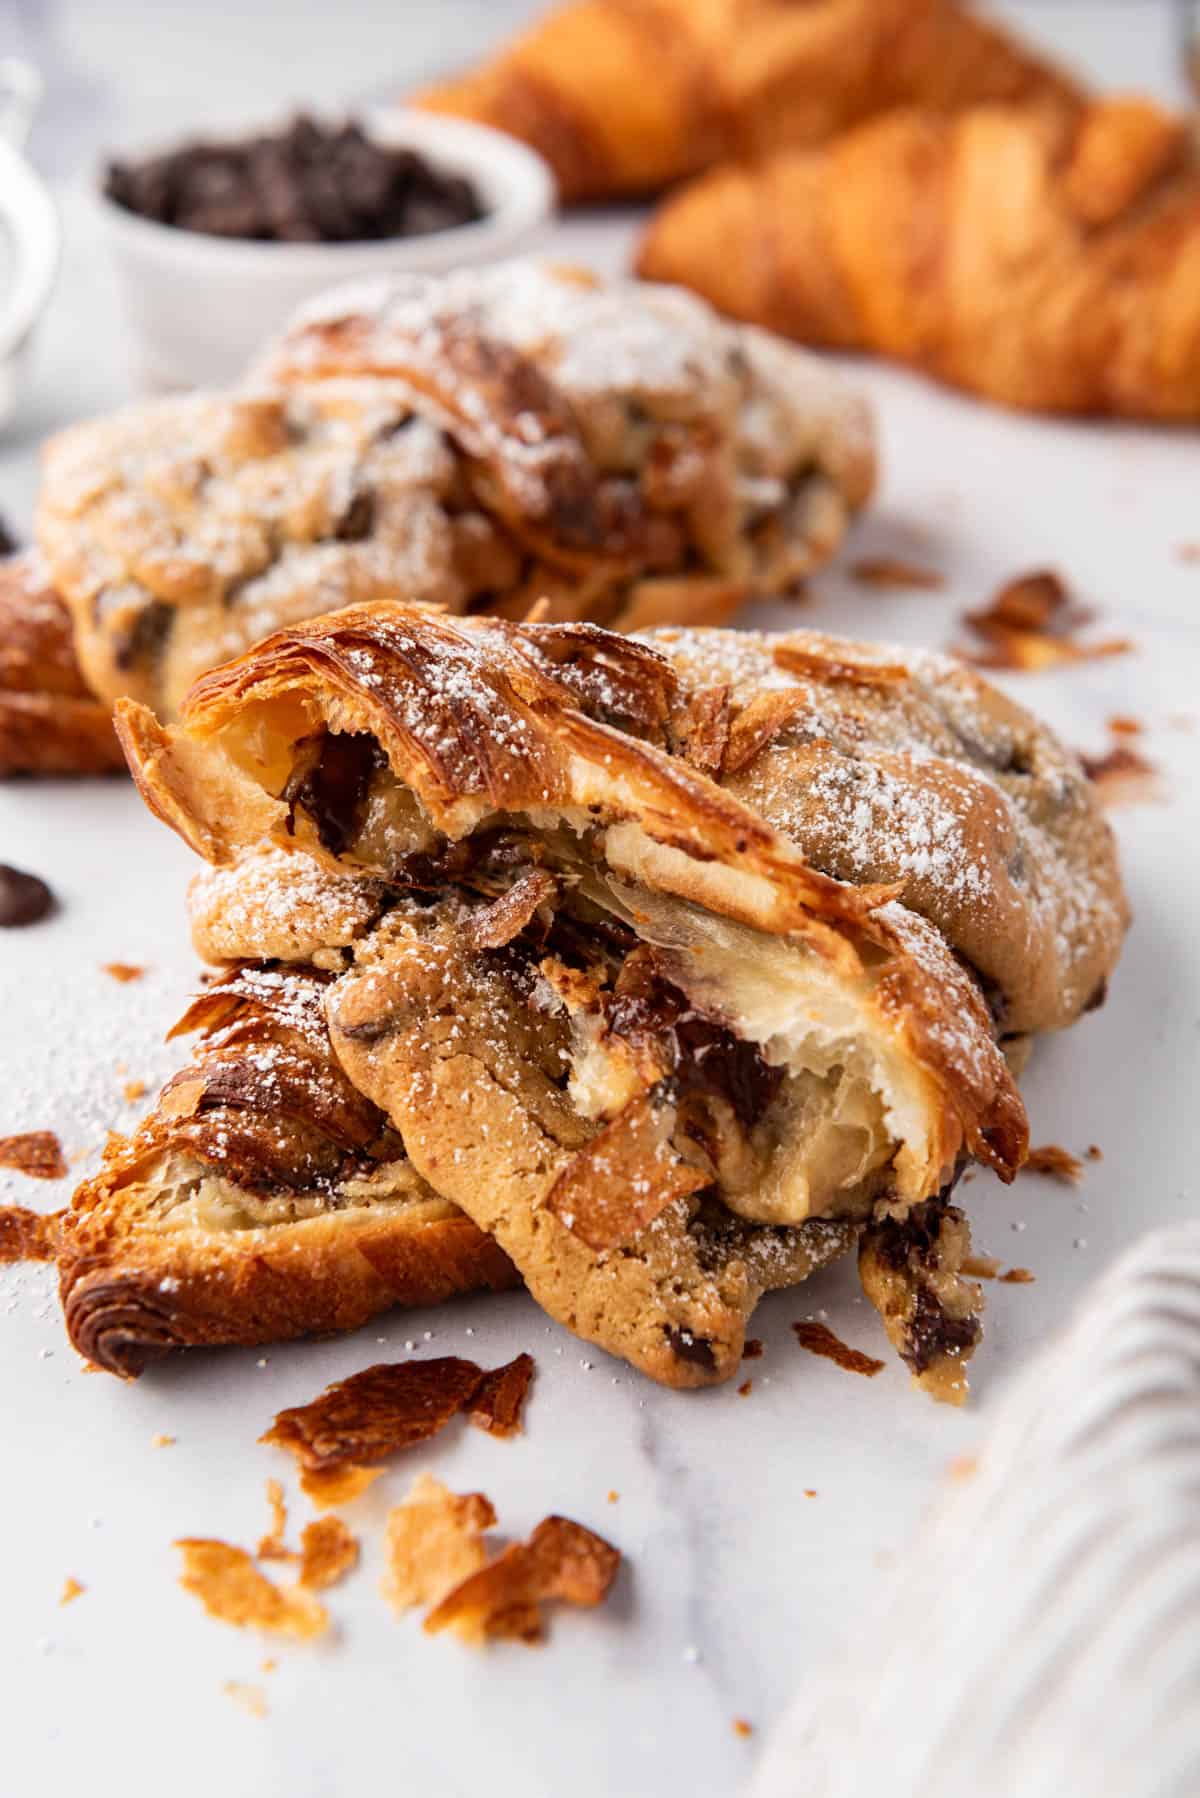 An image of a flaky cookie croissant that has been torn in half.